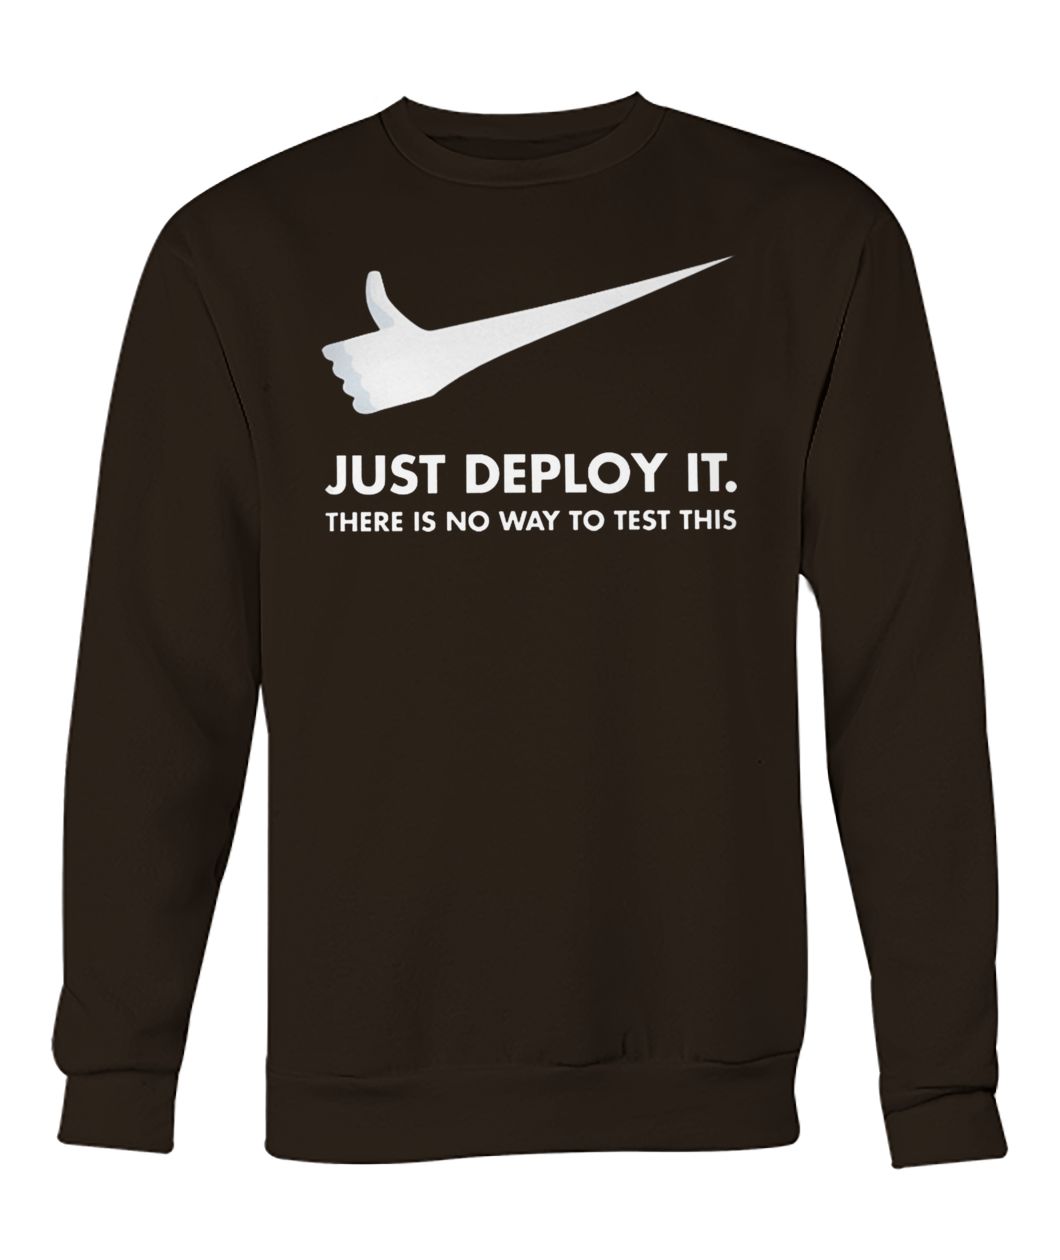 Just deploy it there is no way to test this crew neck sweatshirt